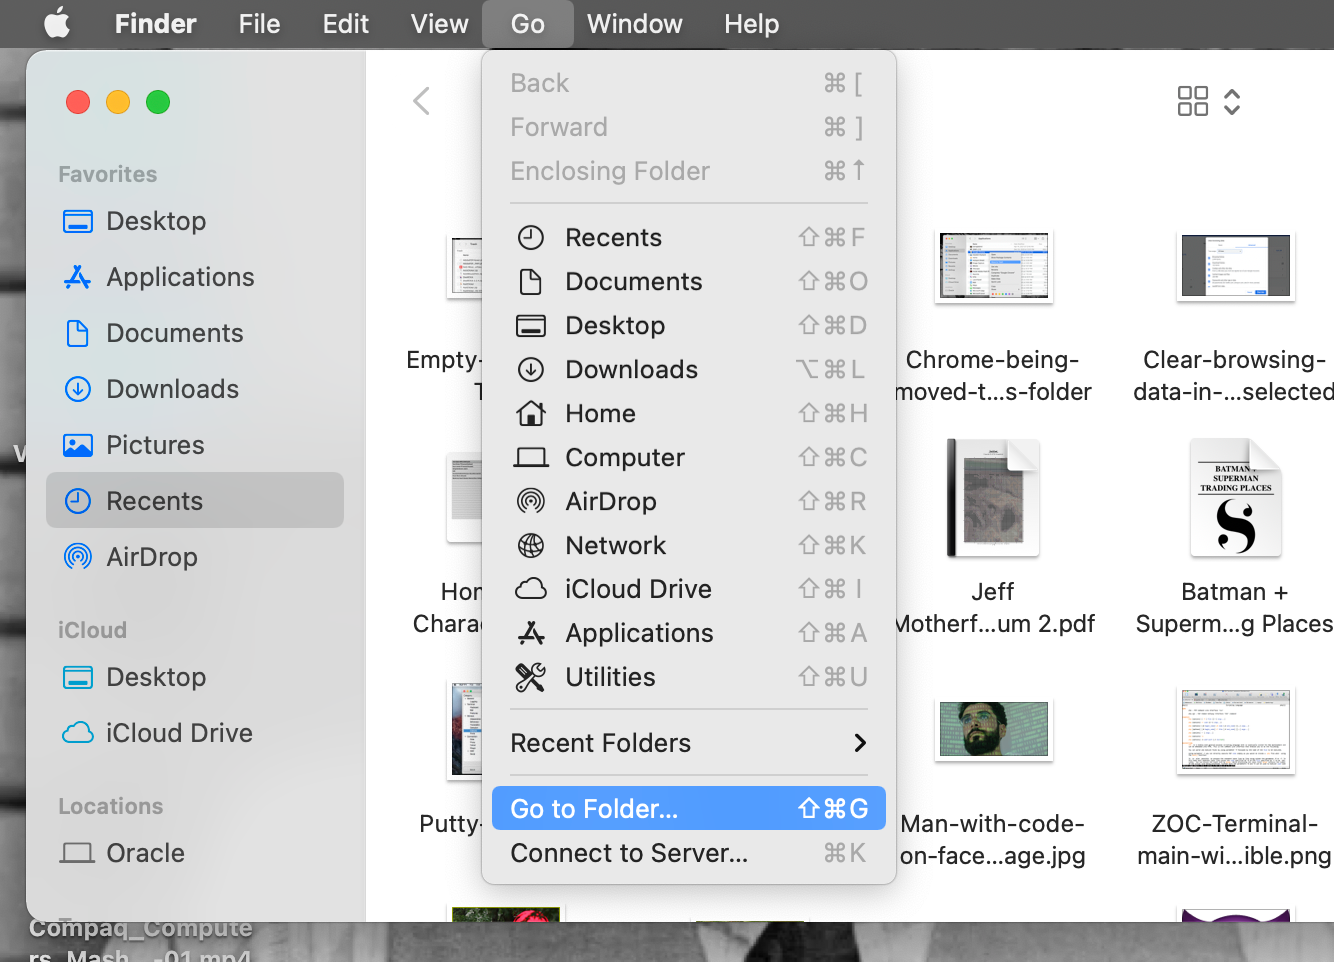 Go to Folder selected within Go menu of Finder